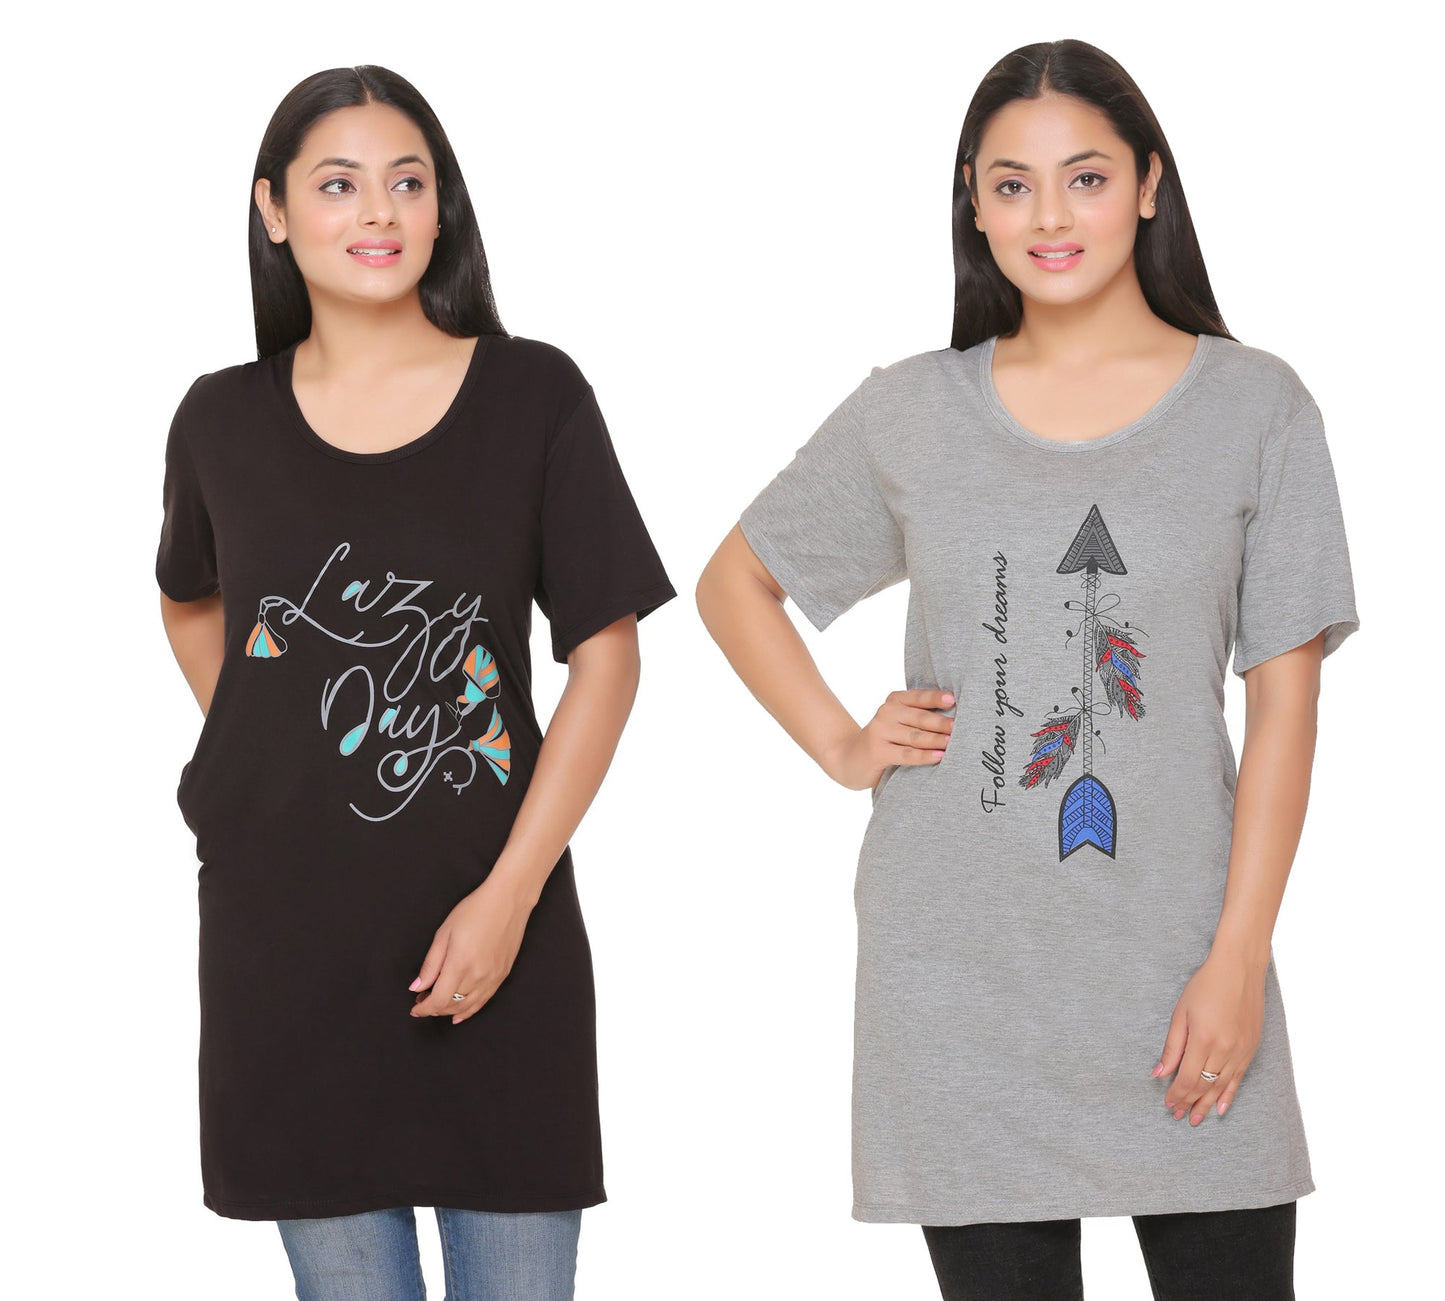 Plus Size Long T-shirts For Women - Half Sleeve - Pack of 2 (Black & Grey)